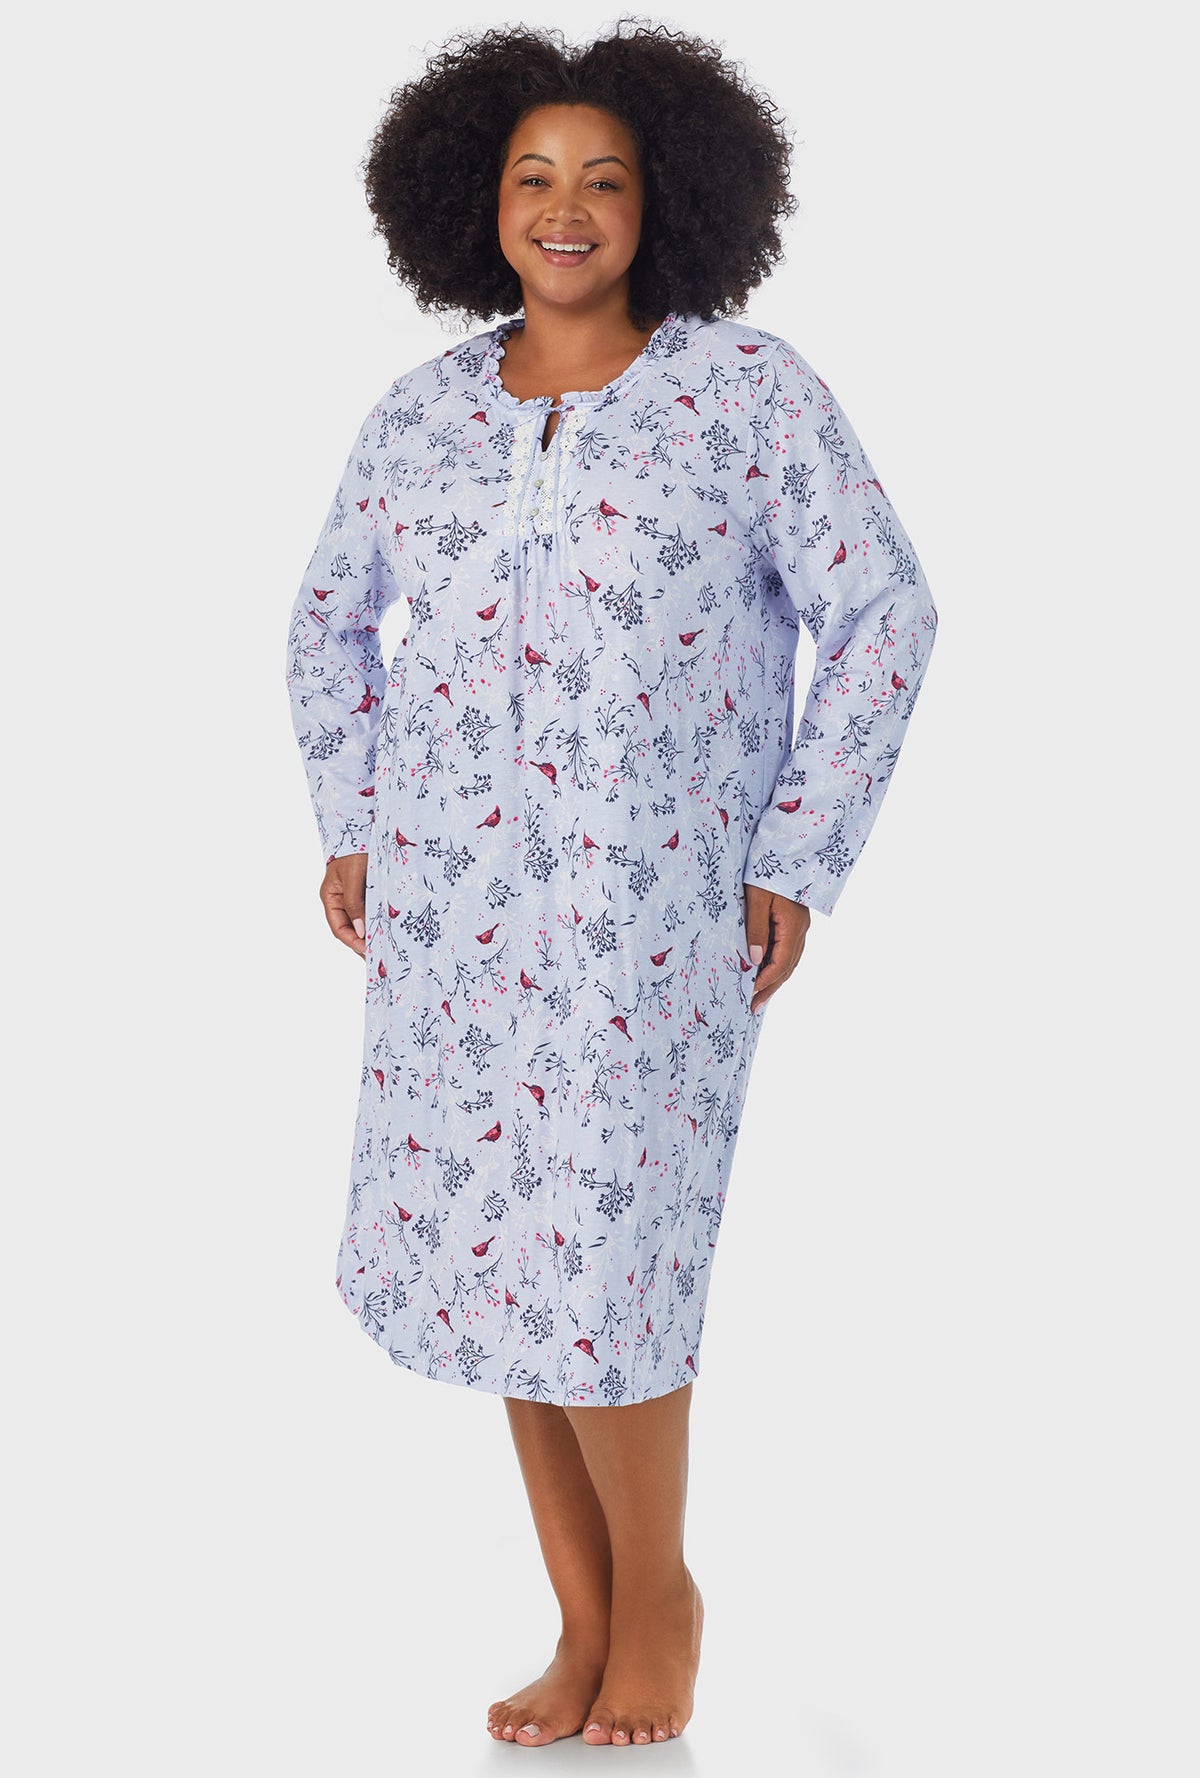 A lady wearing white Long Sleeve Midi plus size Nightgown with Winter Blue Cardinal print